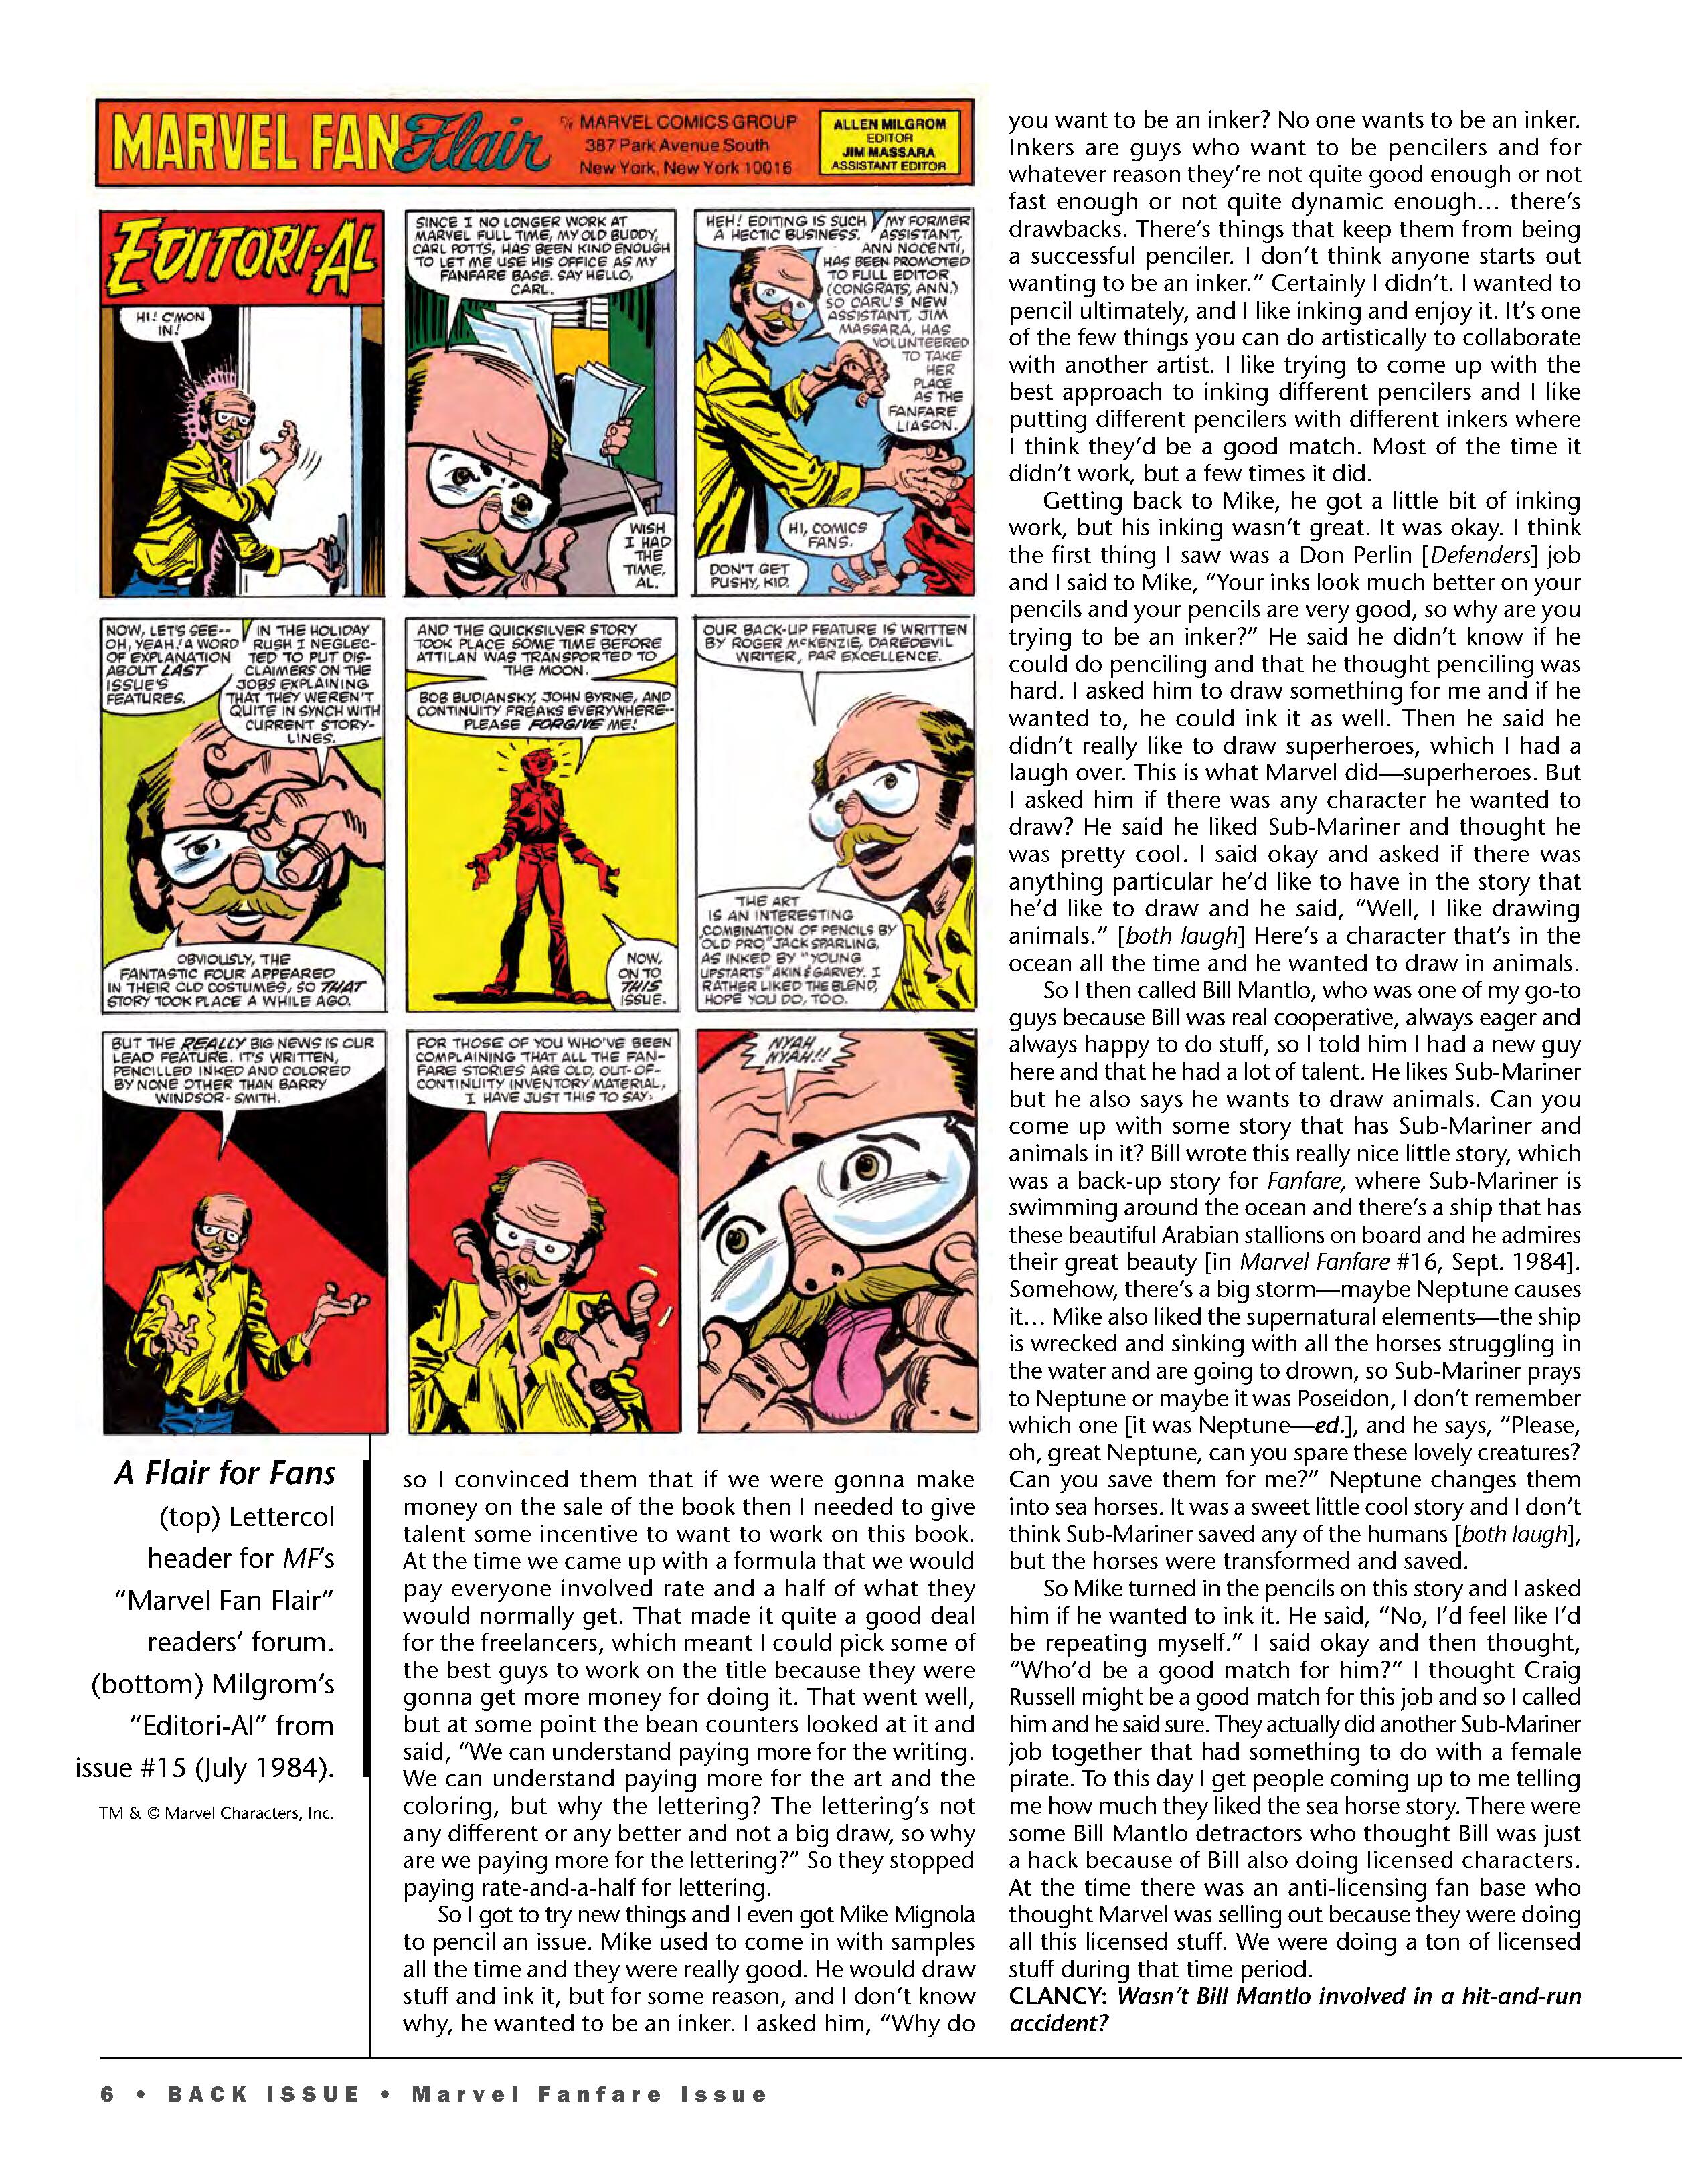 Read online Back Issue comic -  Issue #96 - 8